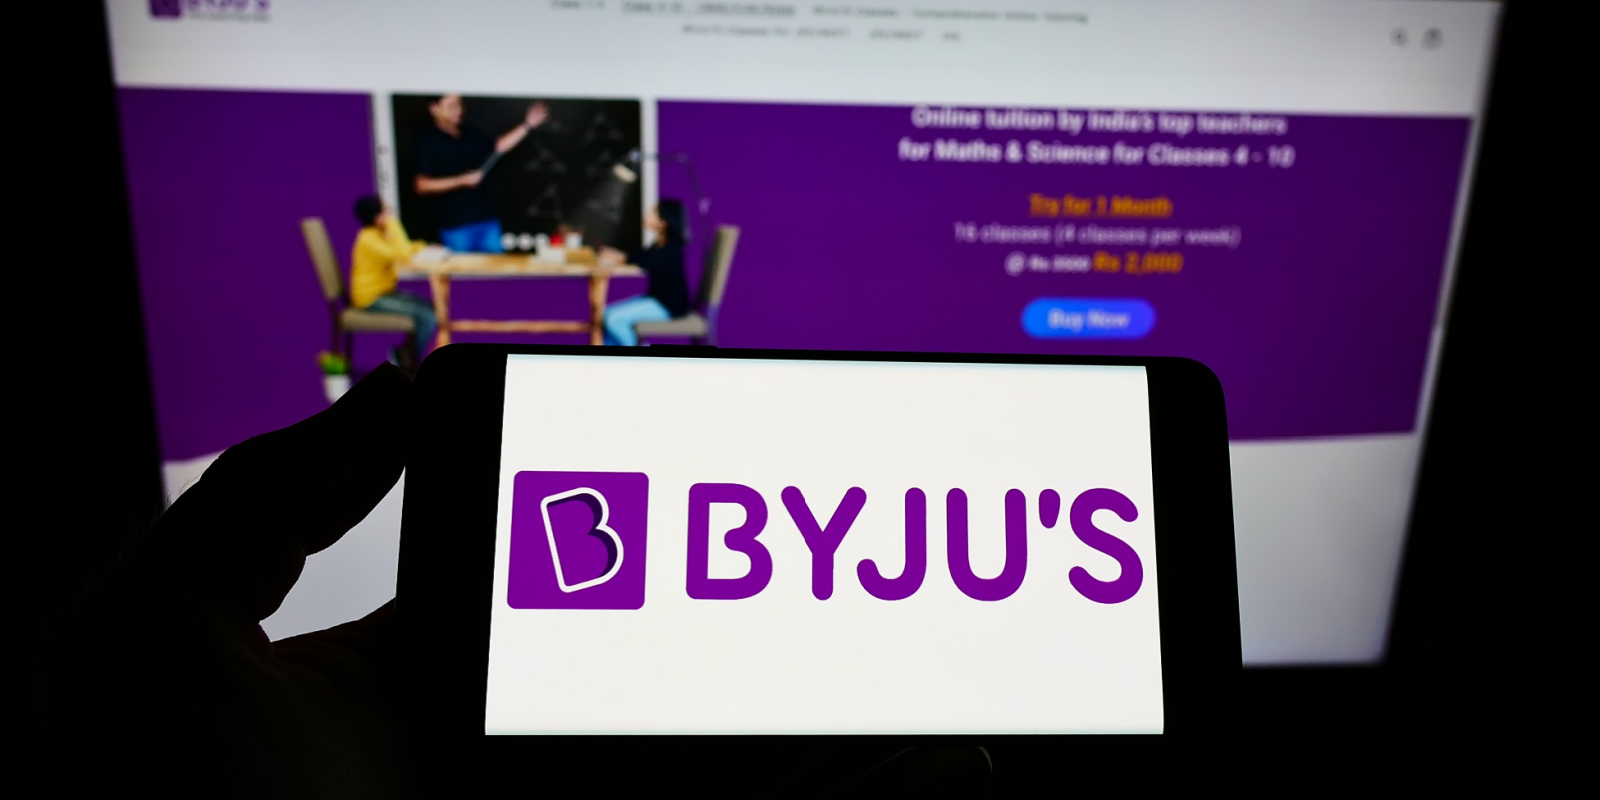 BlackRock marks down BYJU’S fair value by 62%: Report